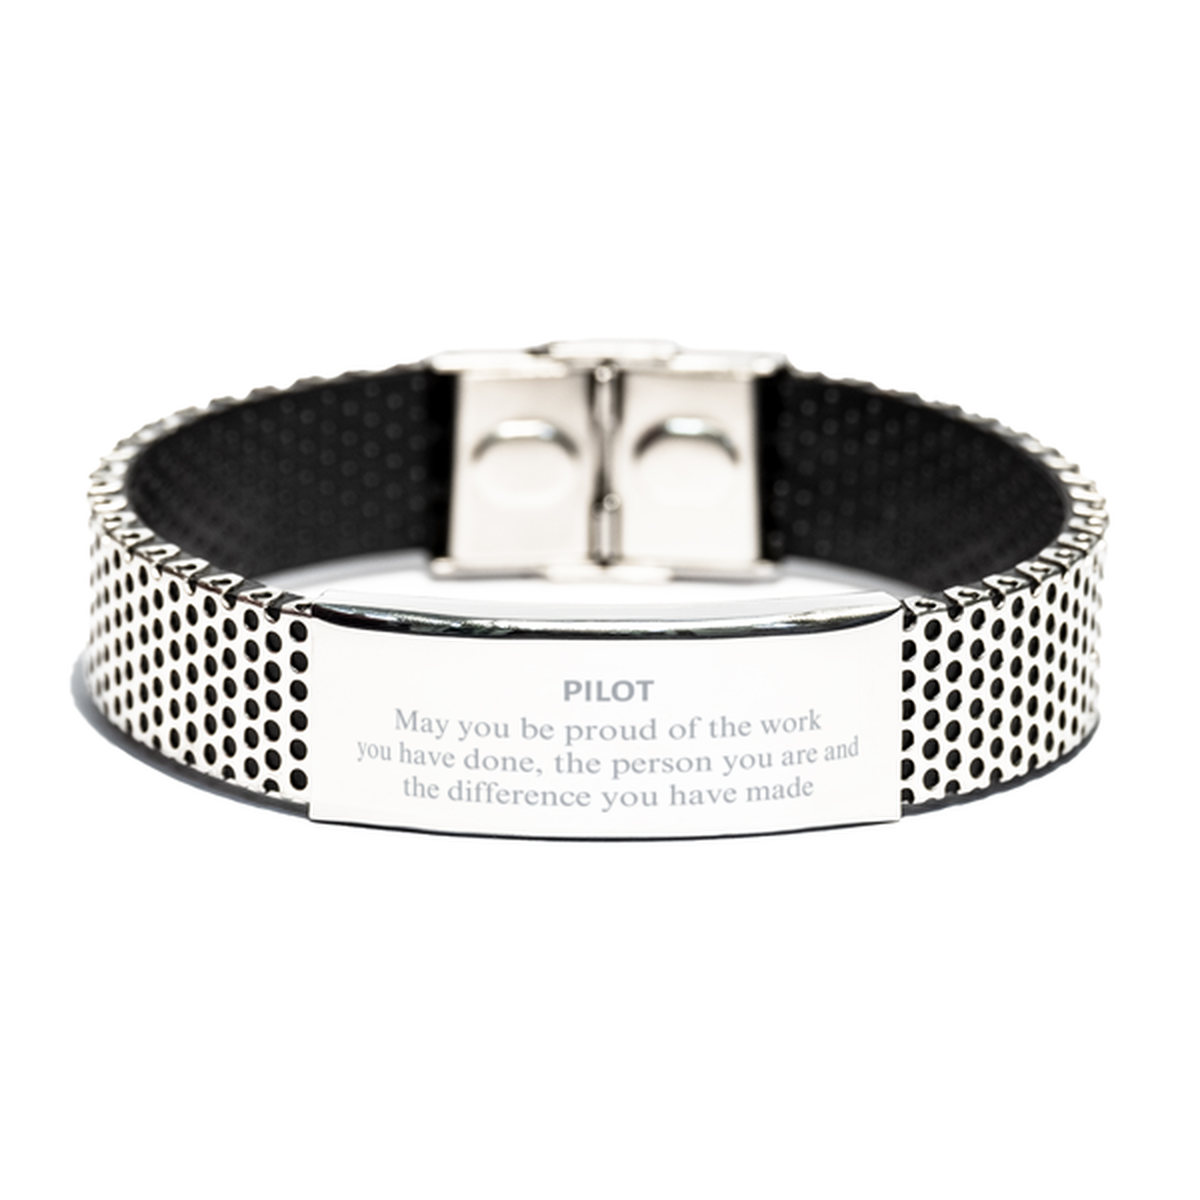 Pilot May you be proud of the work you have done, Retirement Pilot Stainless Steel Bracelet for Colleague Appreciation Gifts Amazing for Pilot